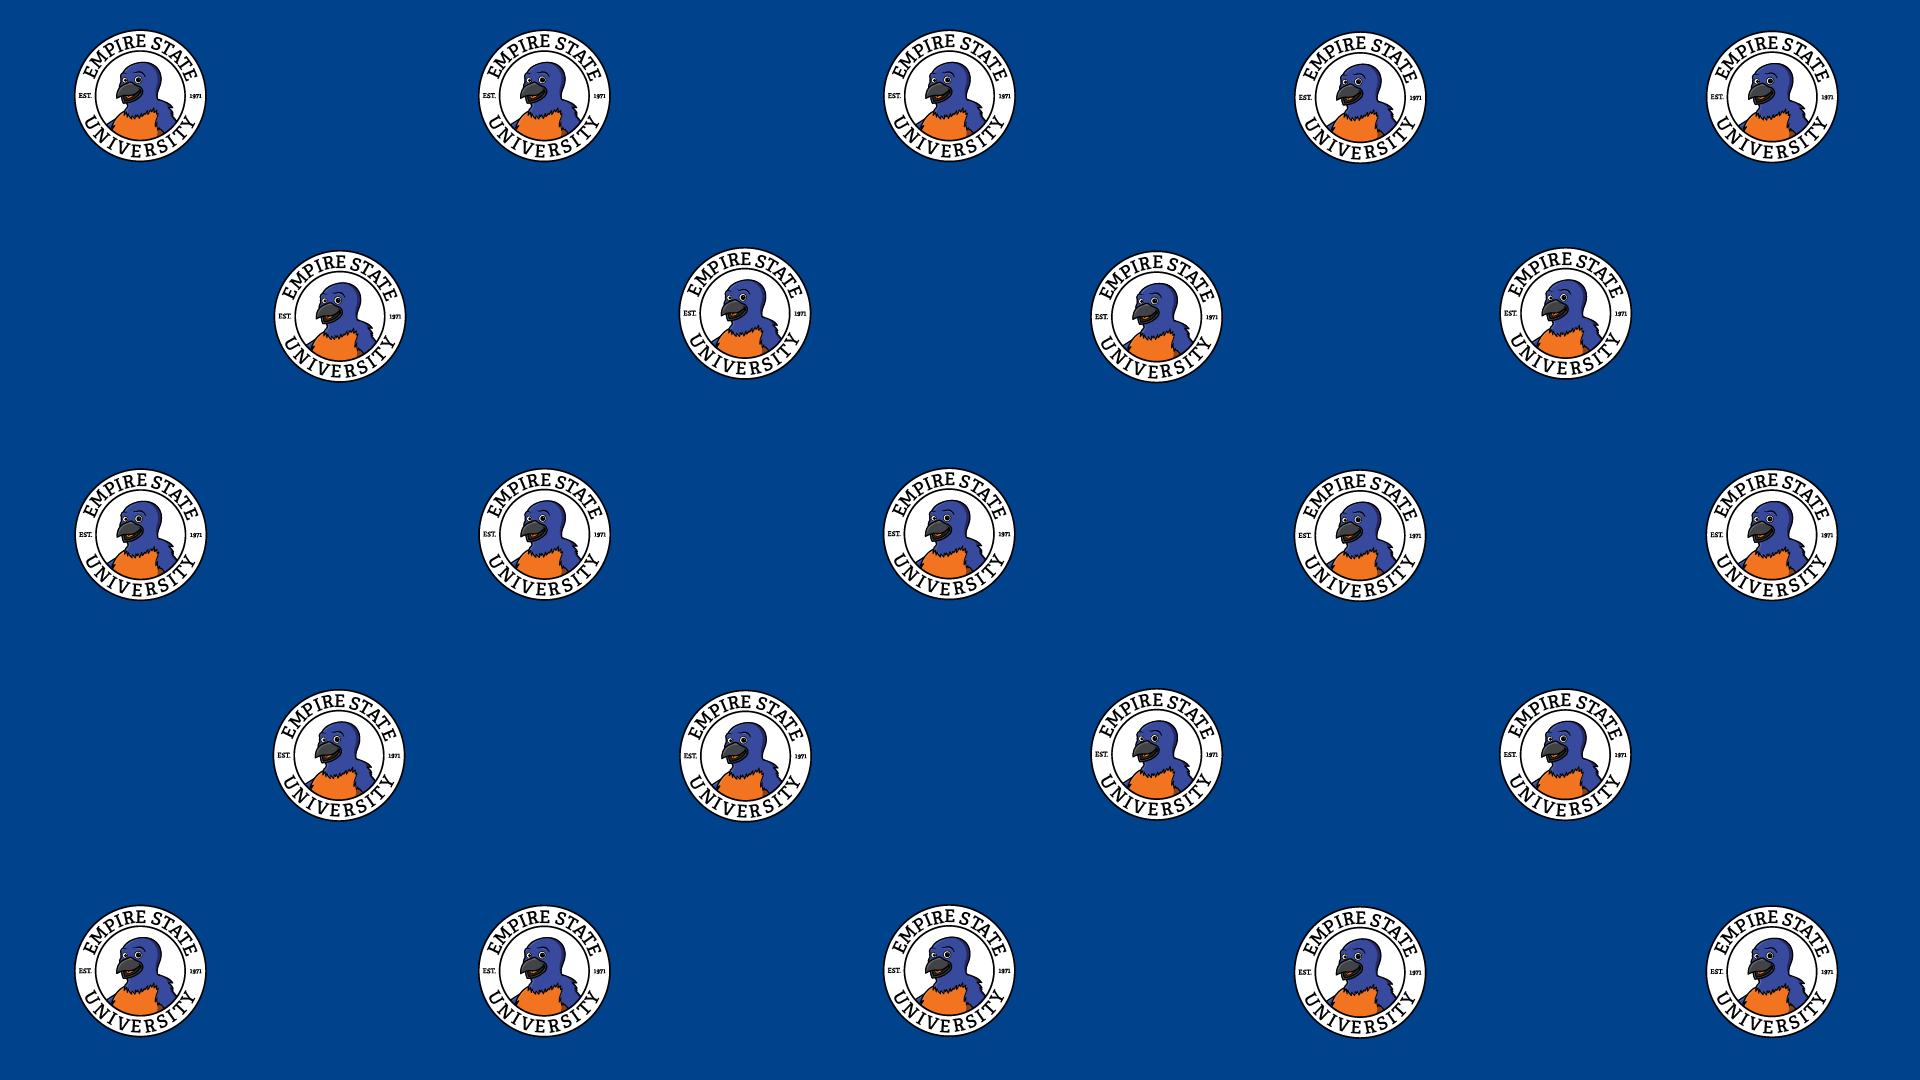 Teams background with Blue in a Empire State University seal